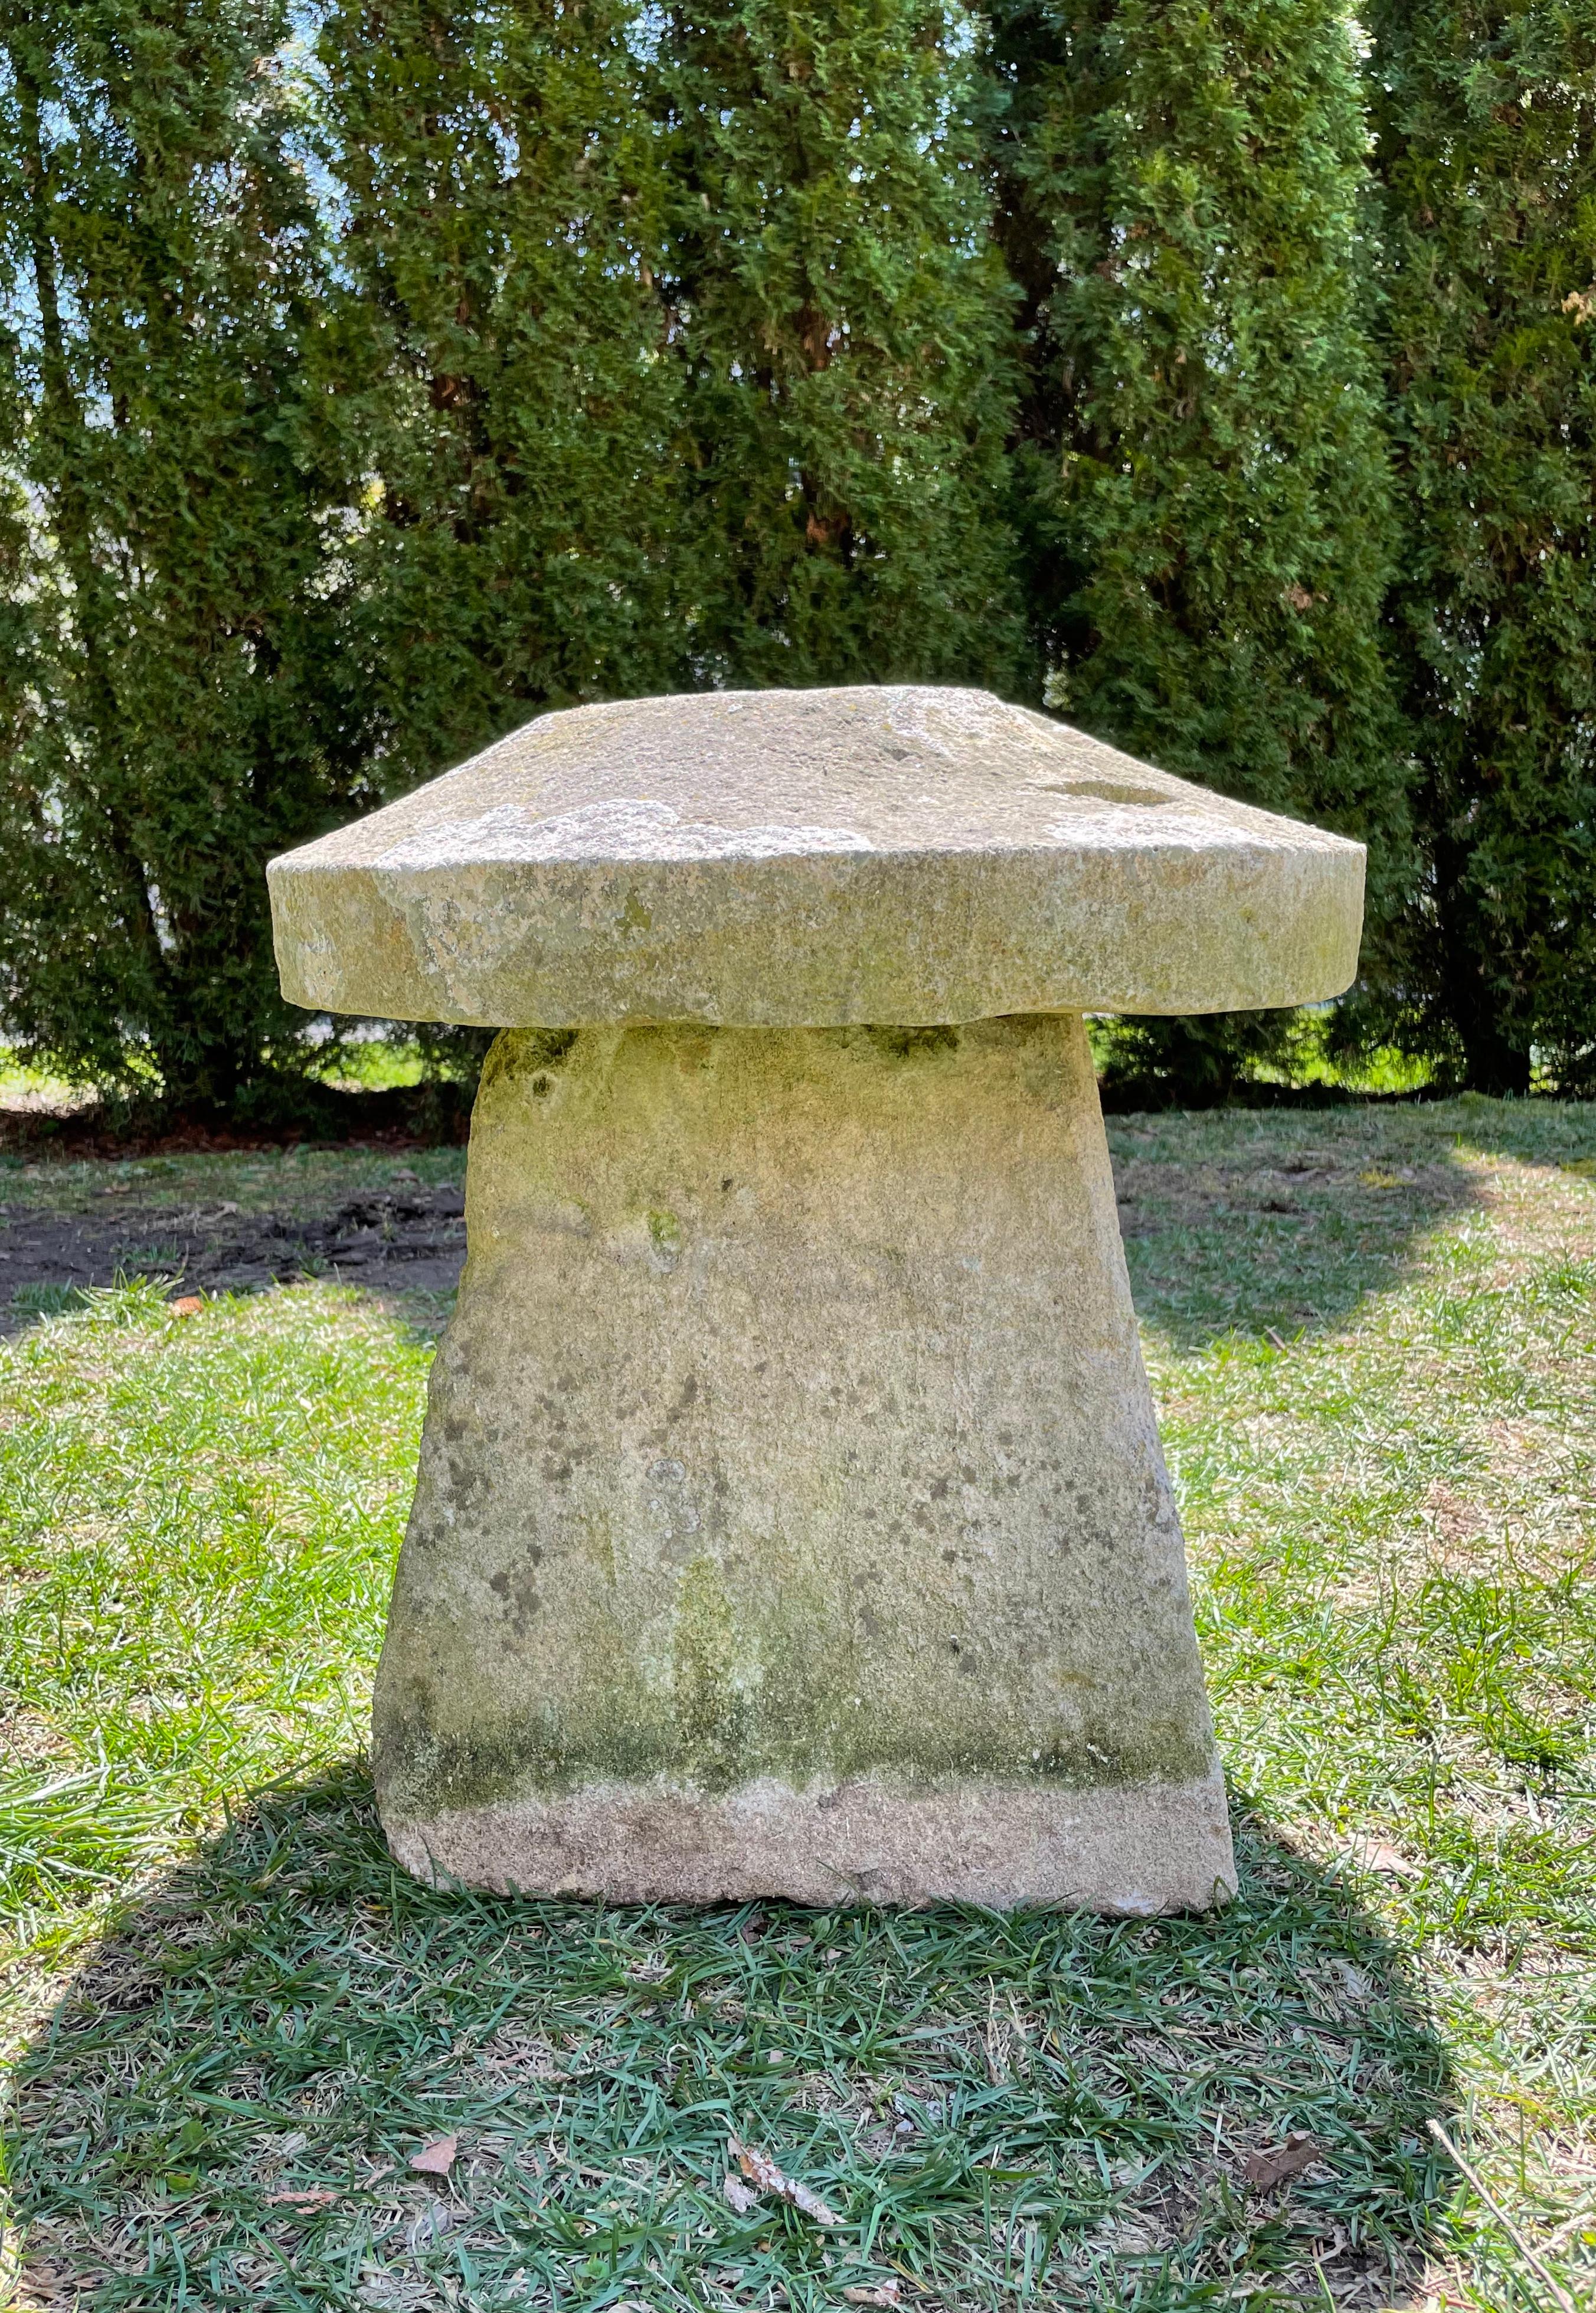 Staddlestones were originally designed as foundation supports for granaries in 16th C England to prevent rats and other vermin from climbing inside the barns and eating the grain. This one is hand-carved from Ham Stone, and has a